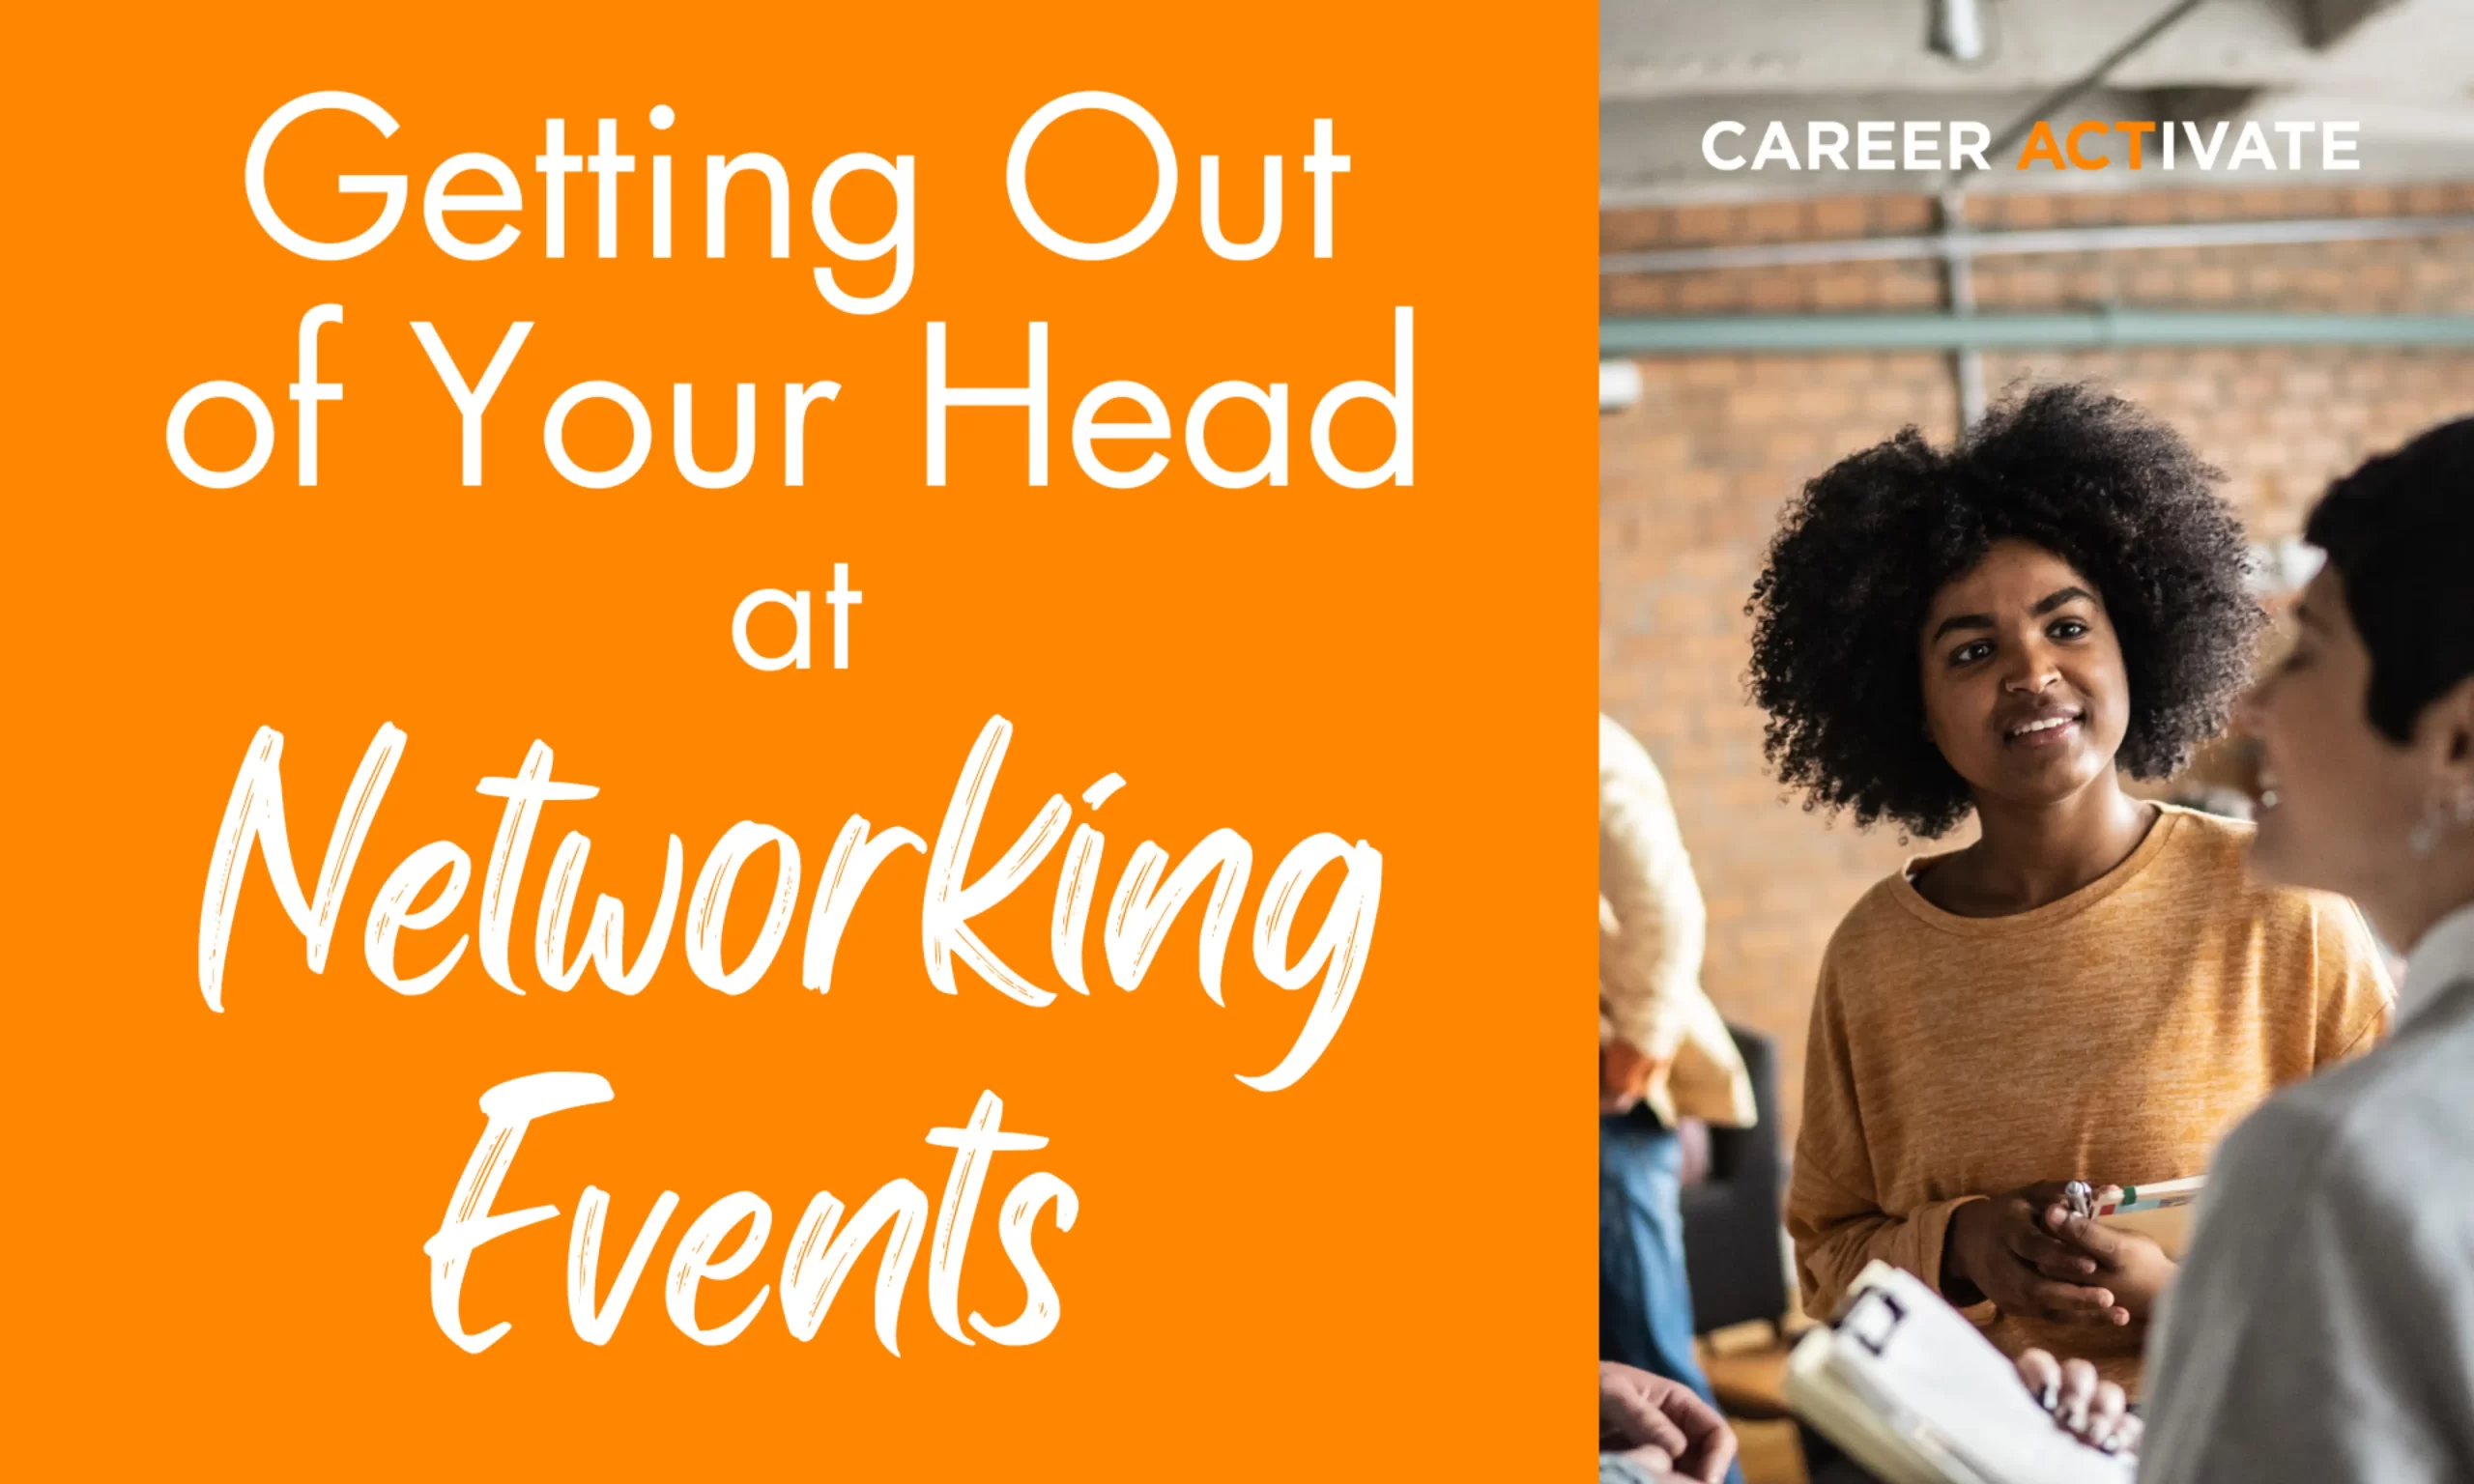 Getting Out of Your Head at Networking Events